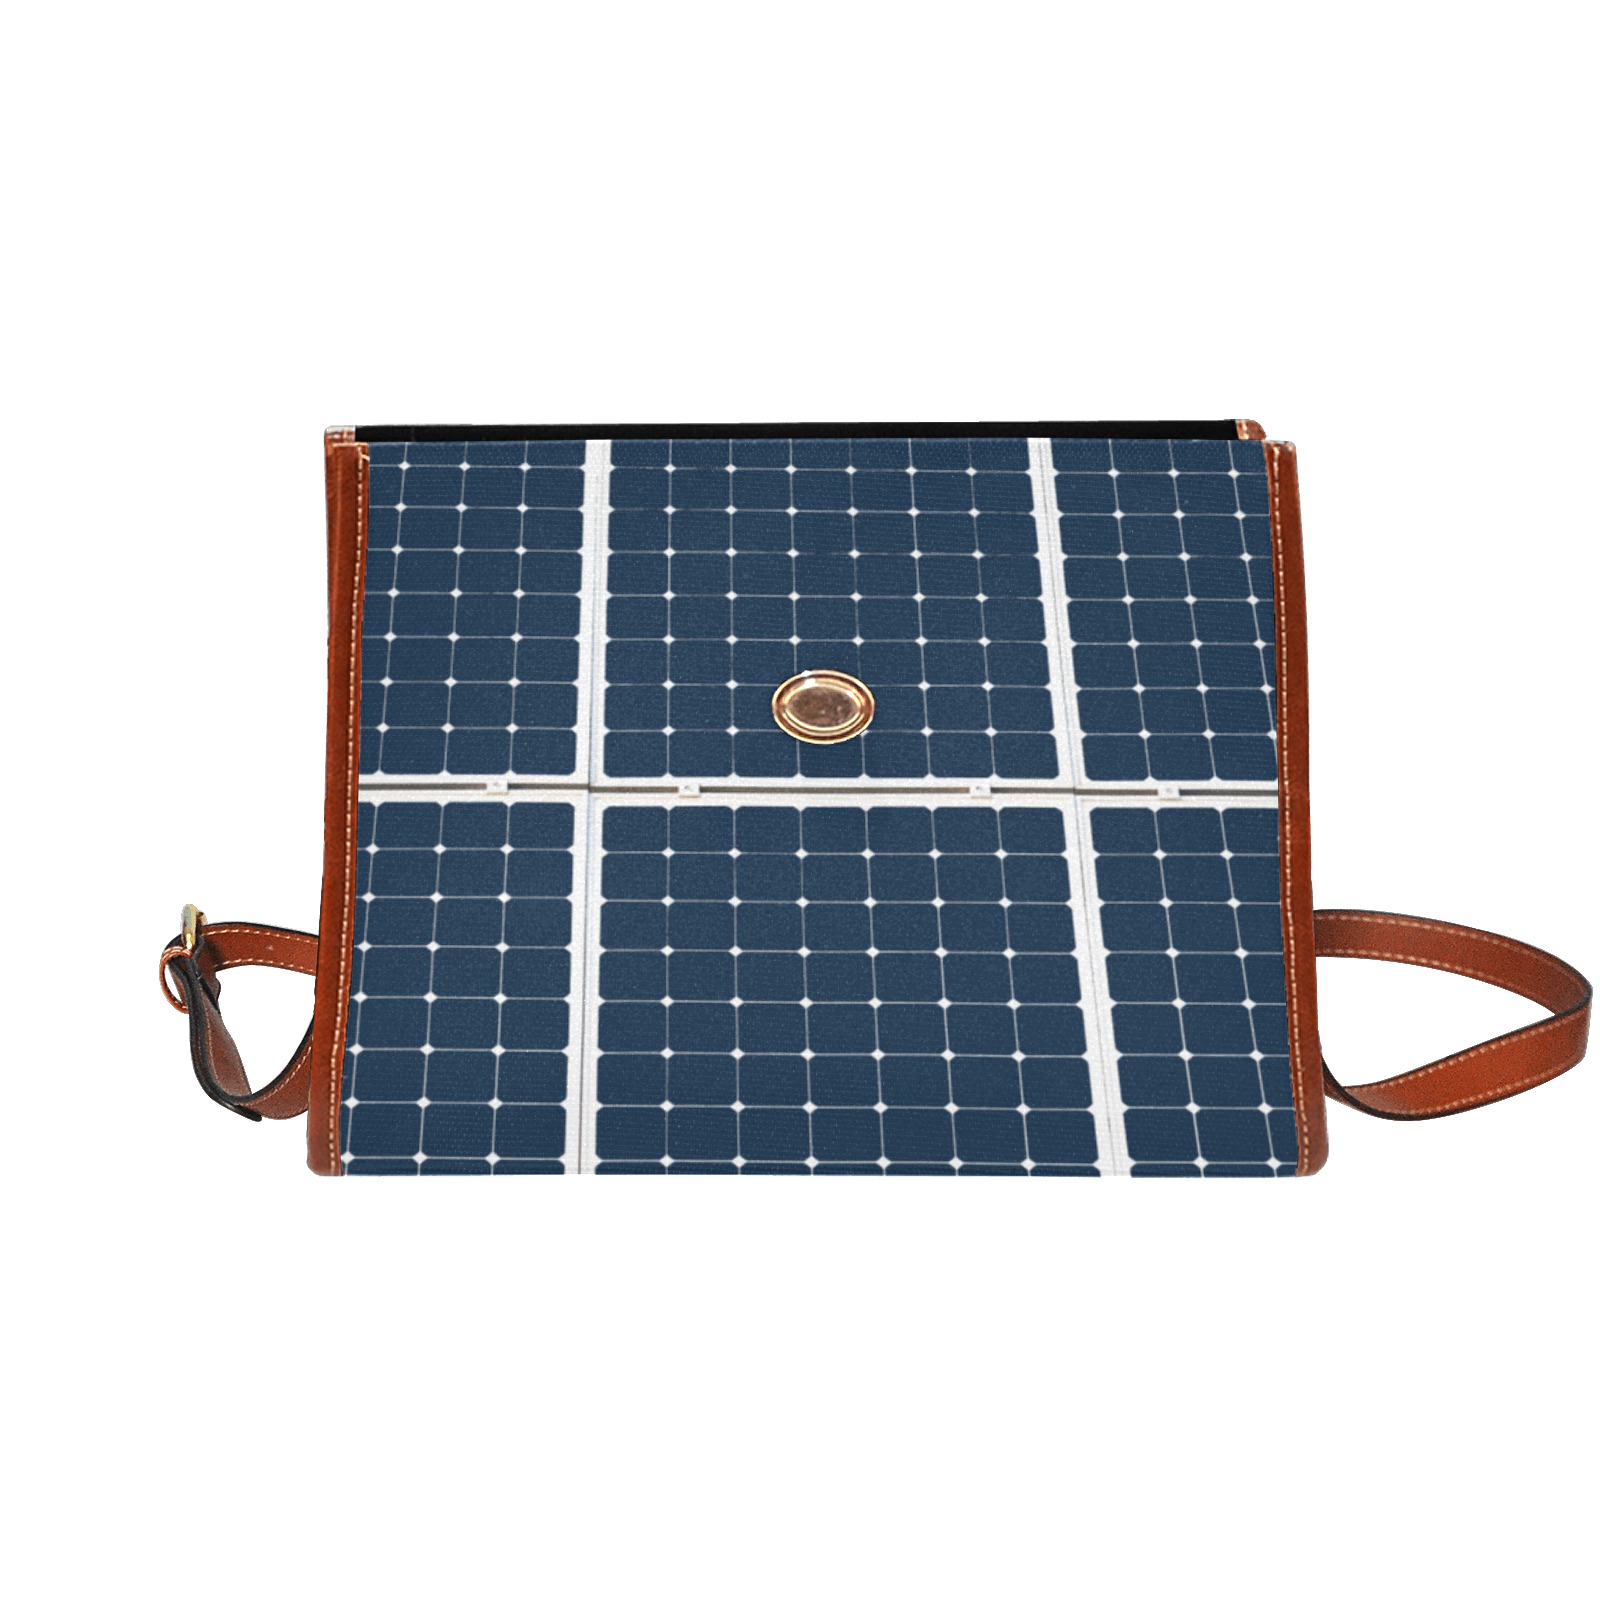 Solar Technology Power Panel Image Cell Energy Waterproof Canvas Bag-Brown (All Over Print) (Model 1641)